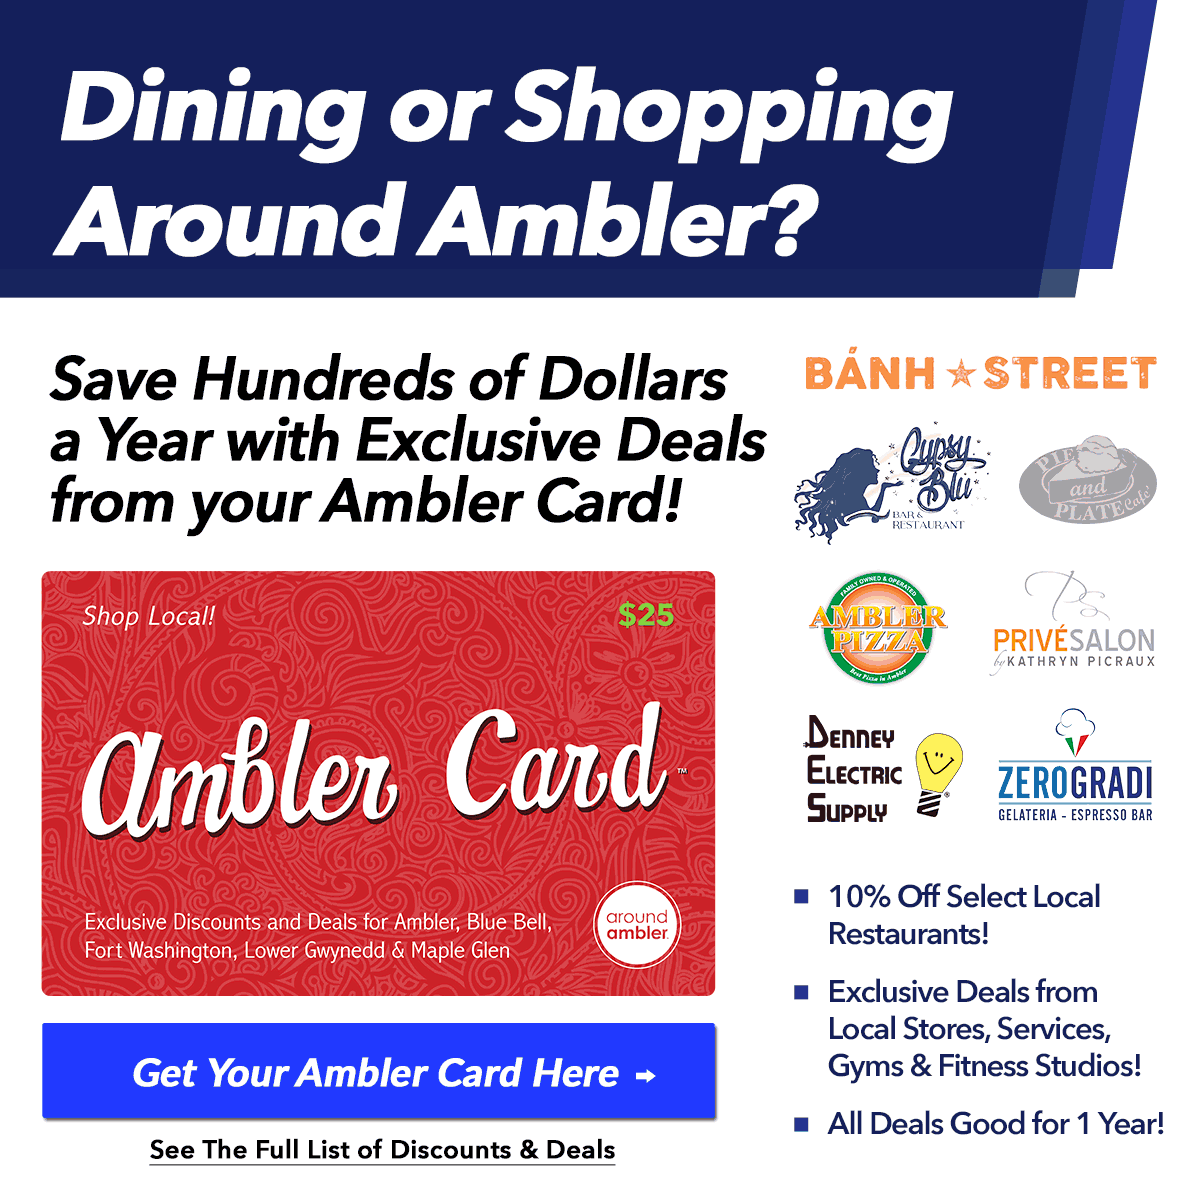 Get Your Ambler Card Today